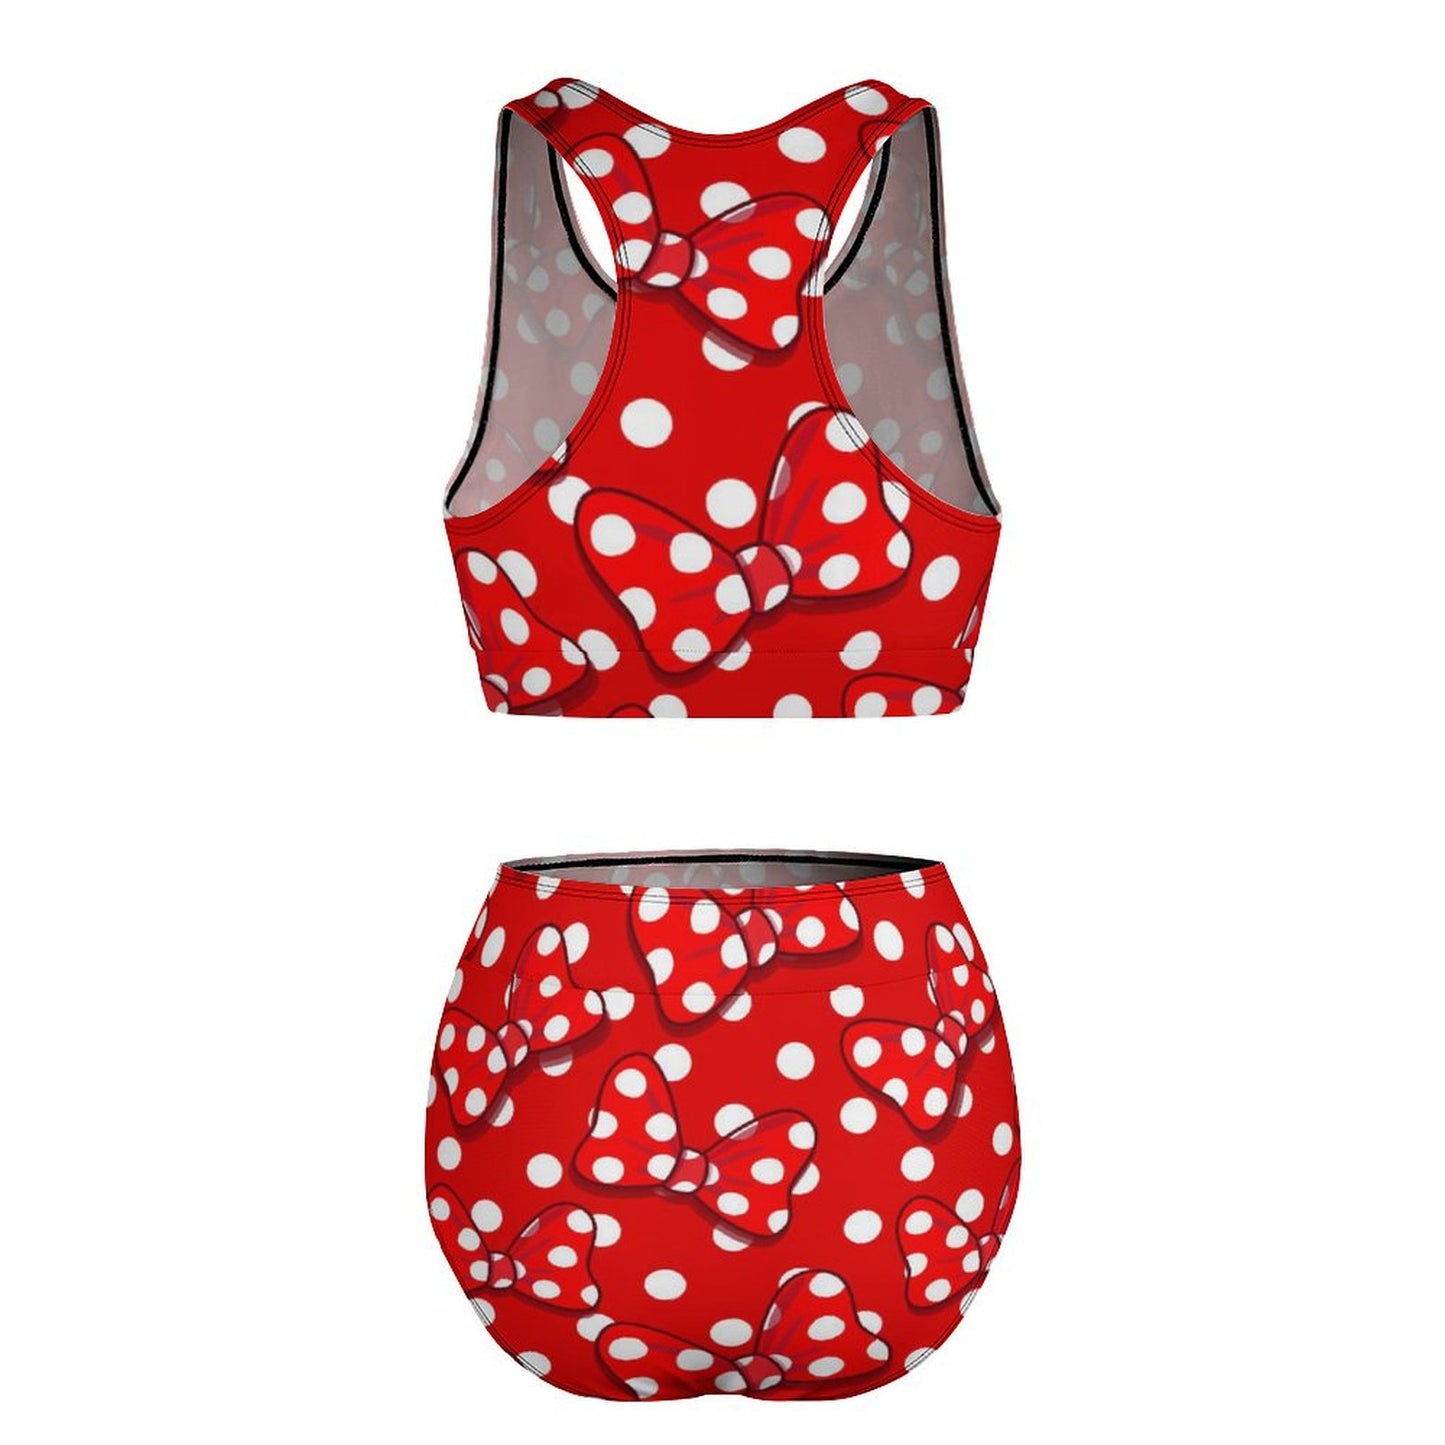 Red With White Polka Dot And Bows Women's Bikini Swimsuit